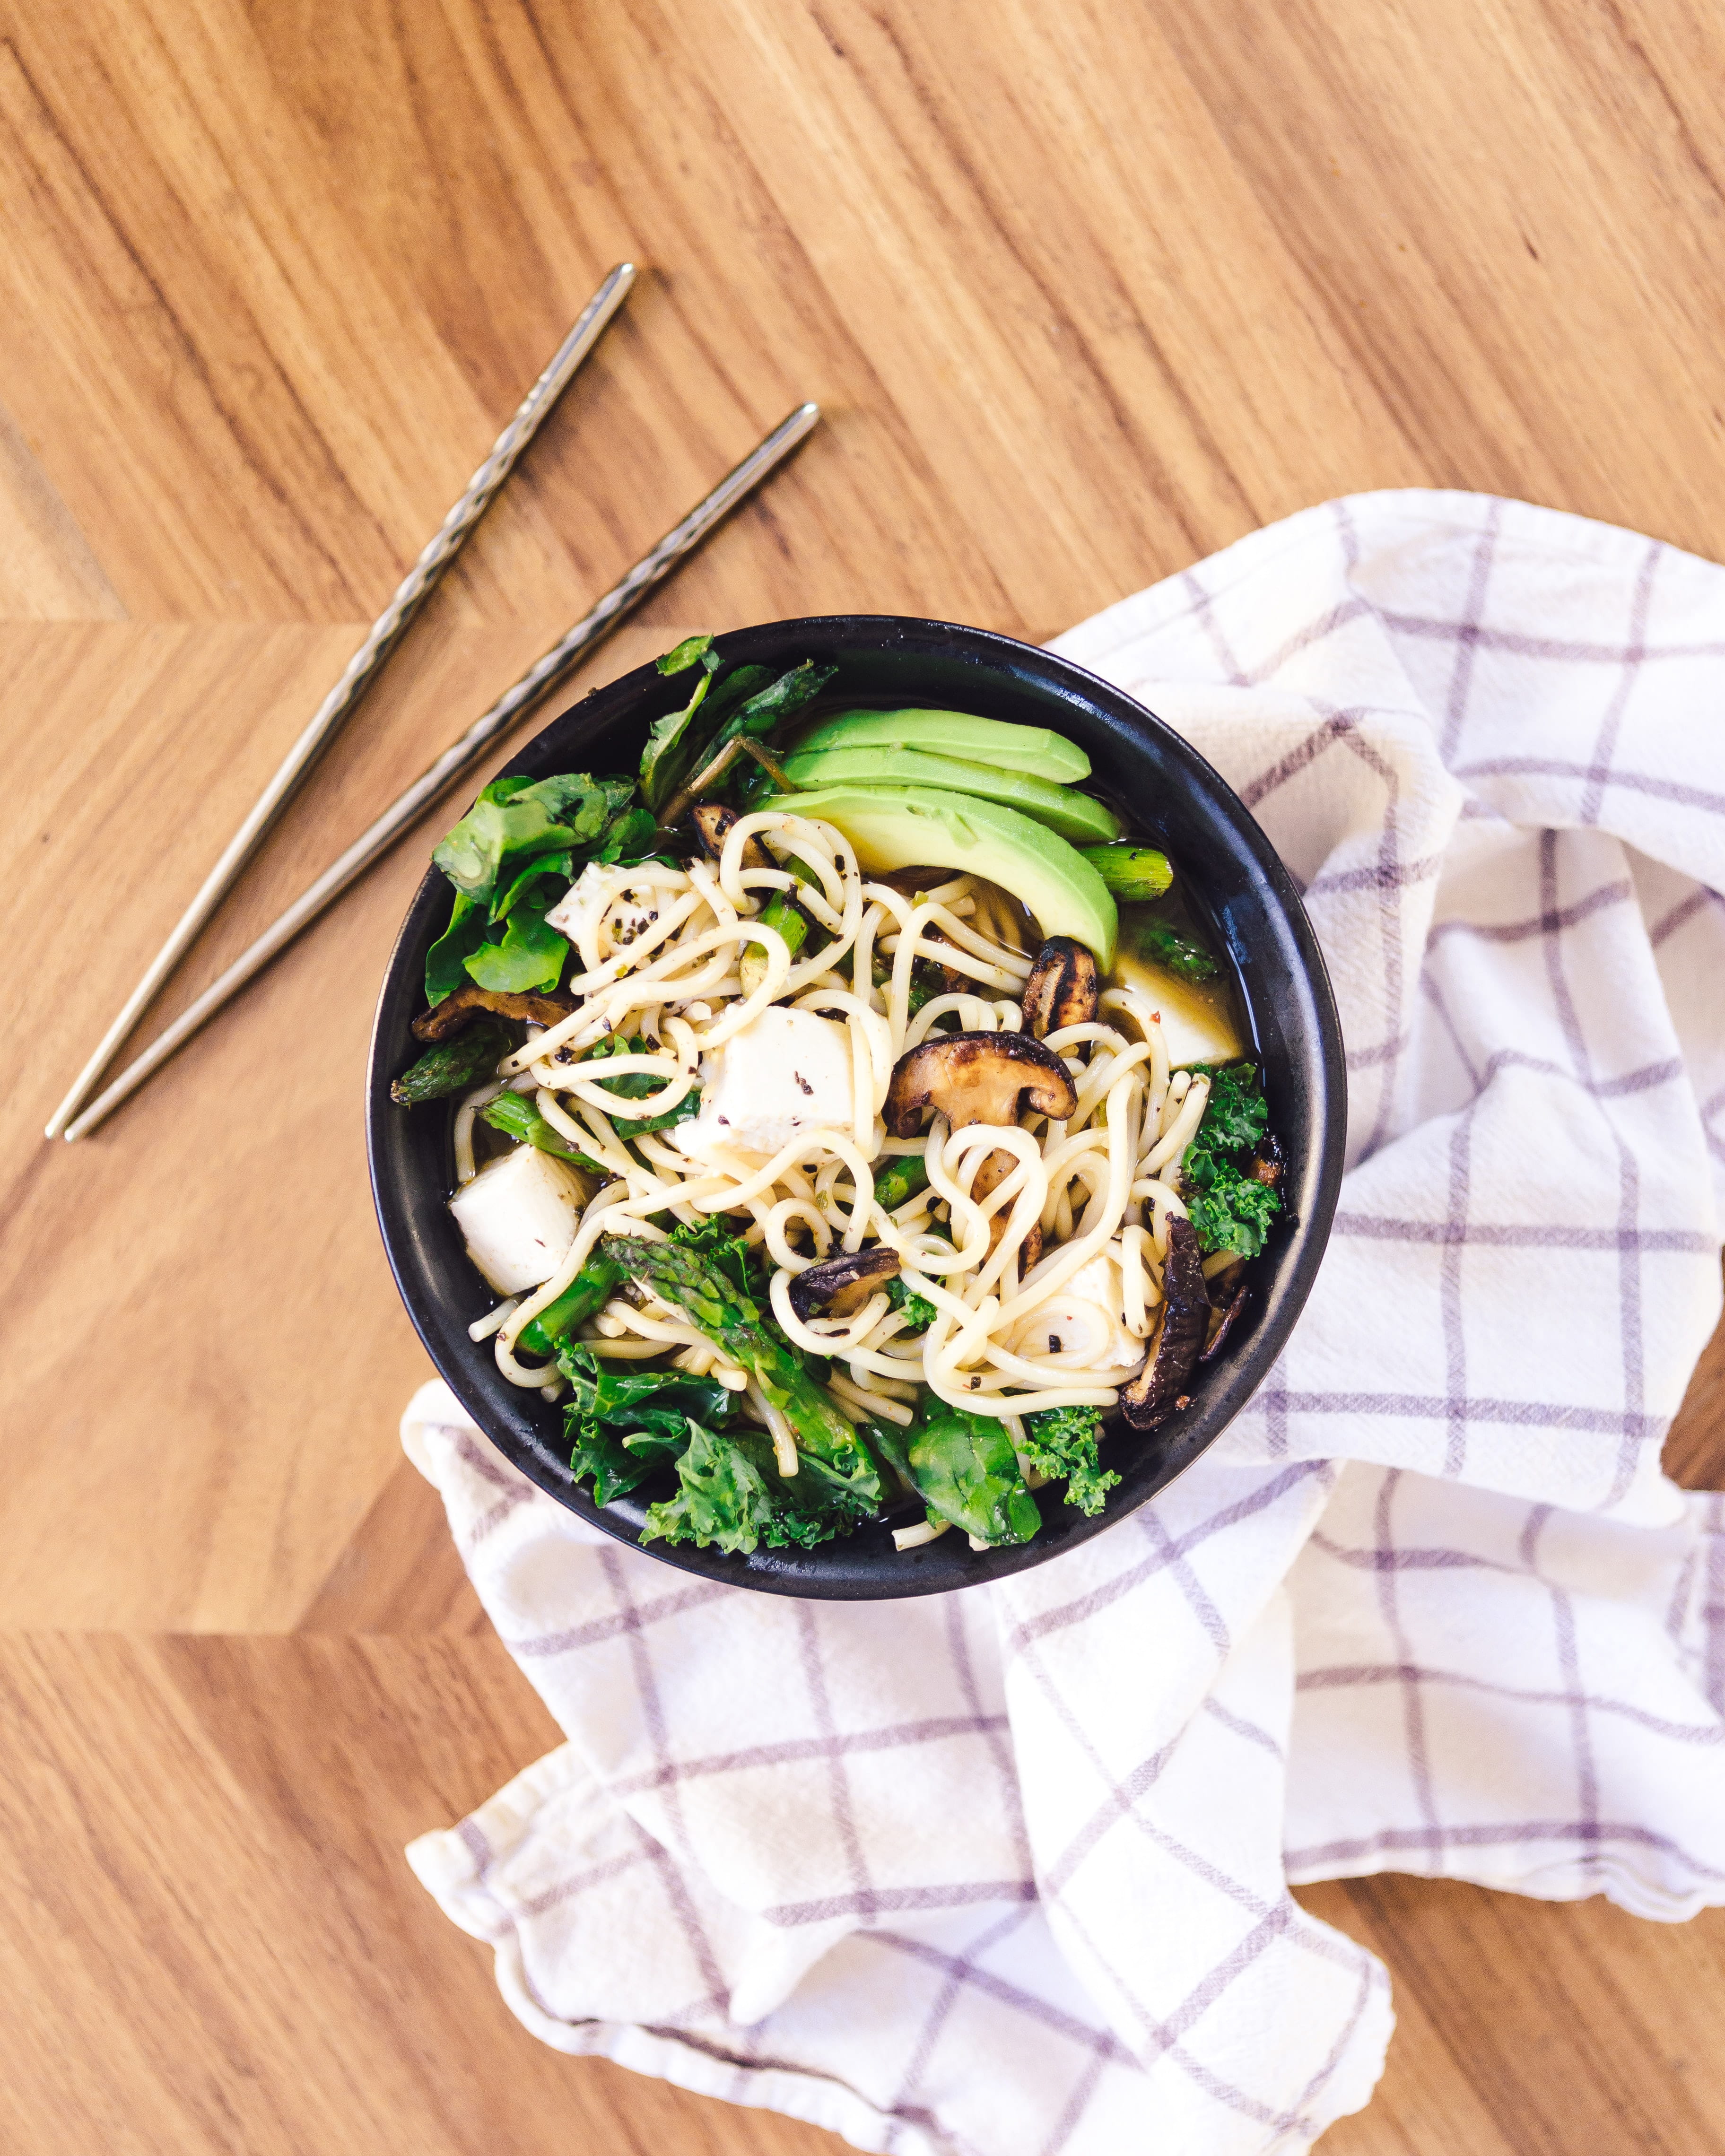 A bowl of ramen with green vegetables and salad leaves. There are chopsticks and a dishcloth to the side of the bowl.